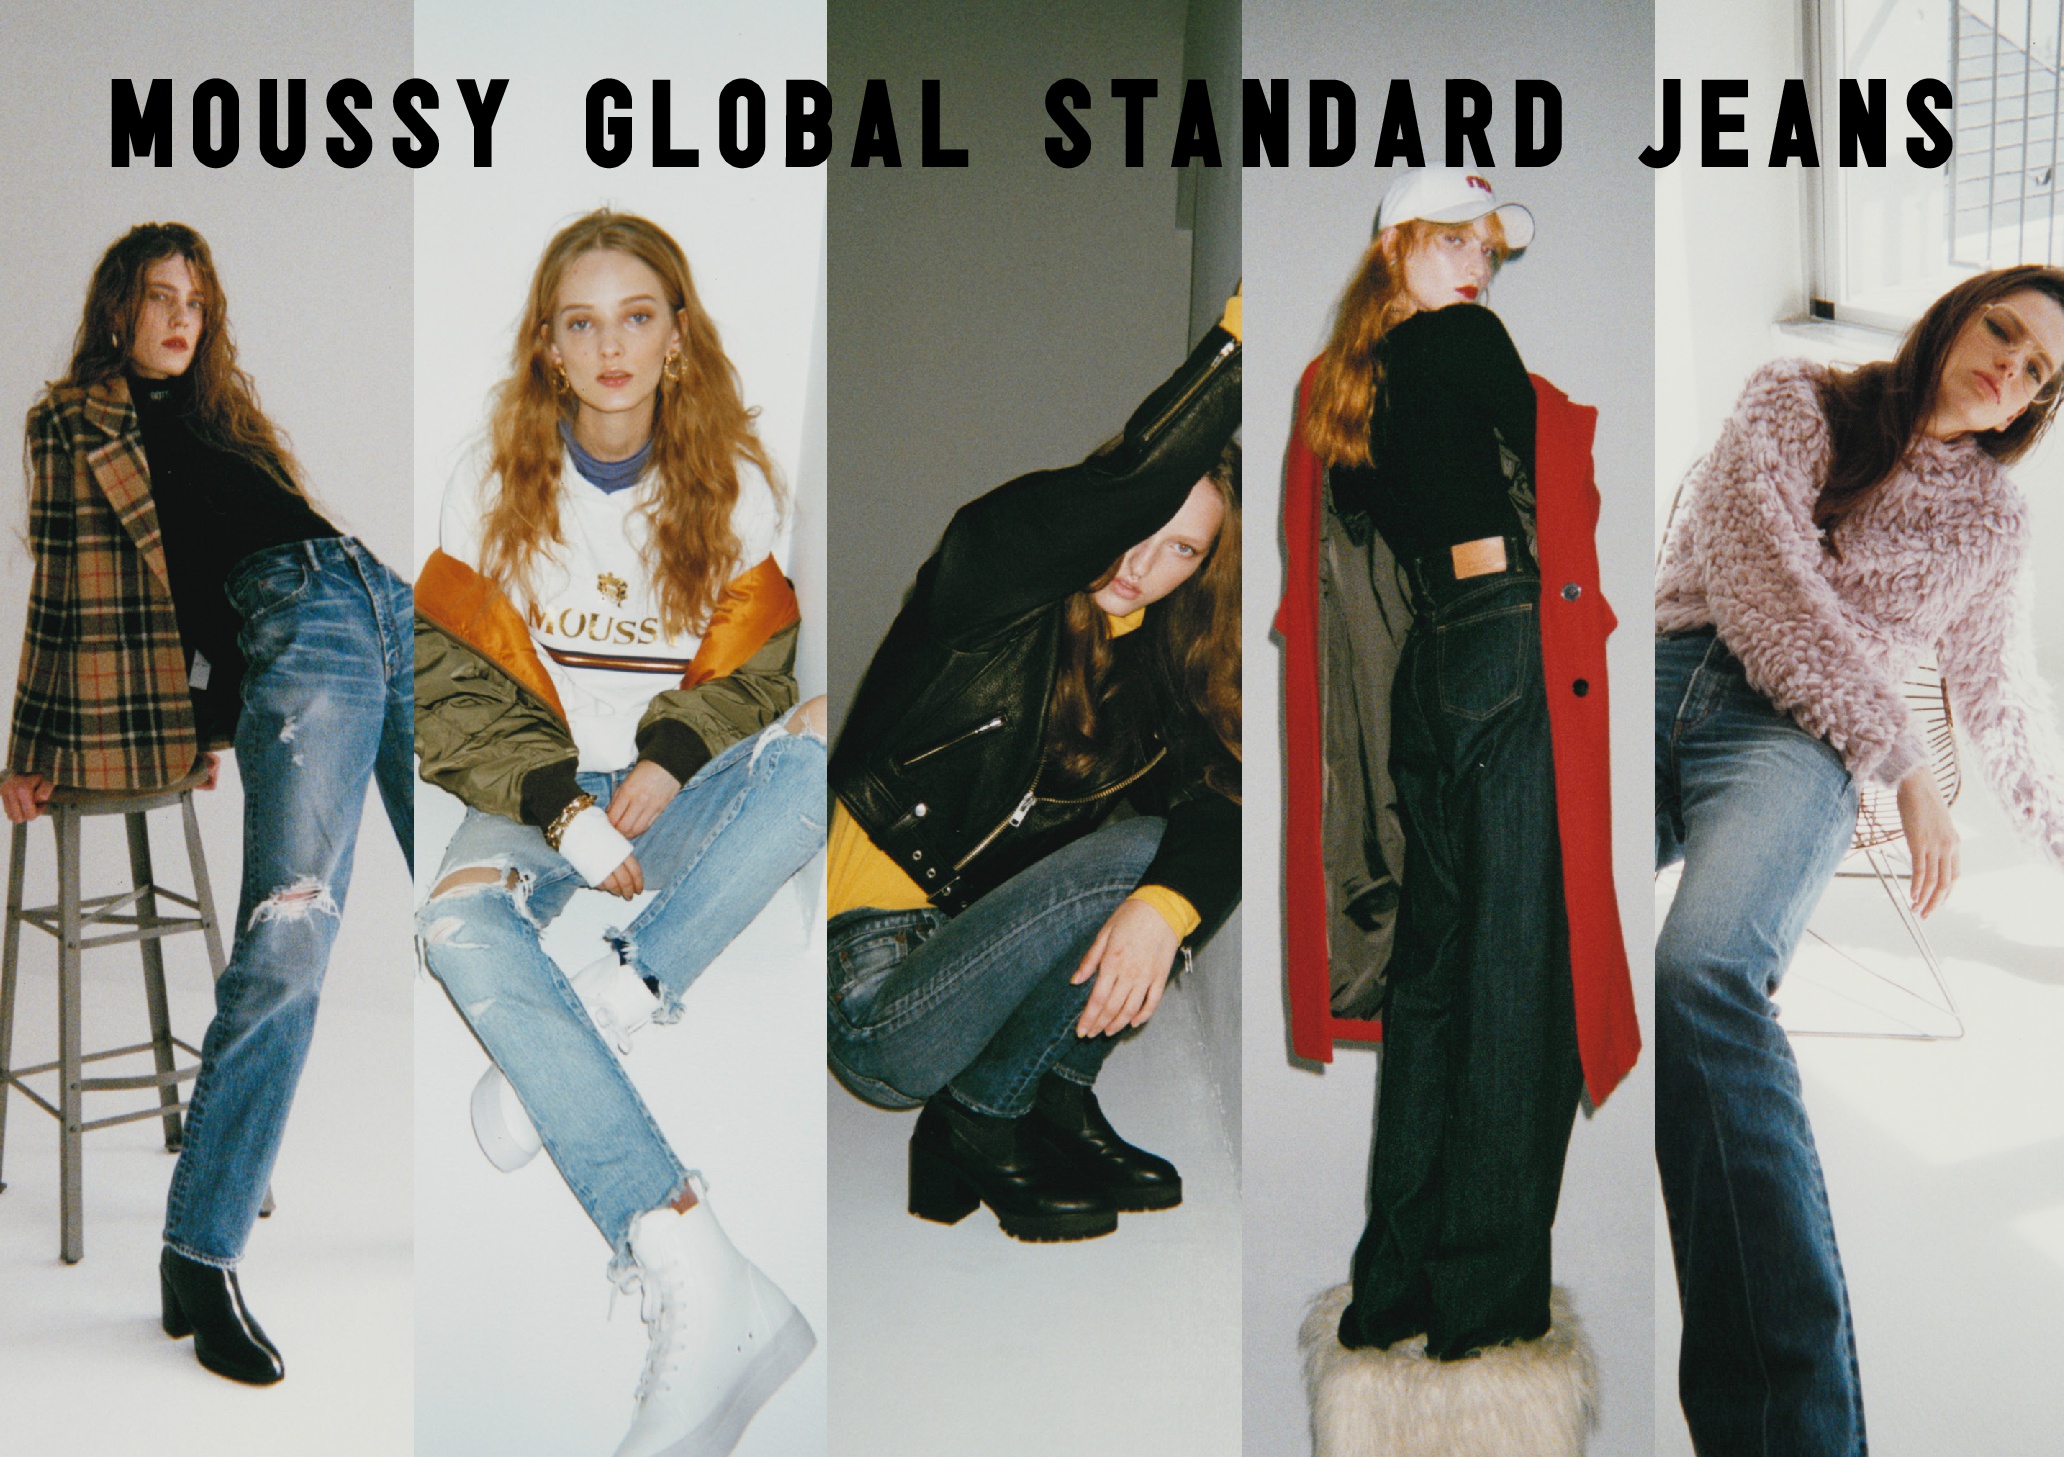 MOUSSY（マウジー）新型5 タイプの MADE IN JAPAN ジーンズを発表 